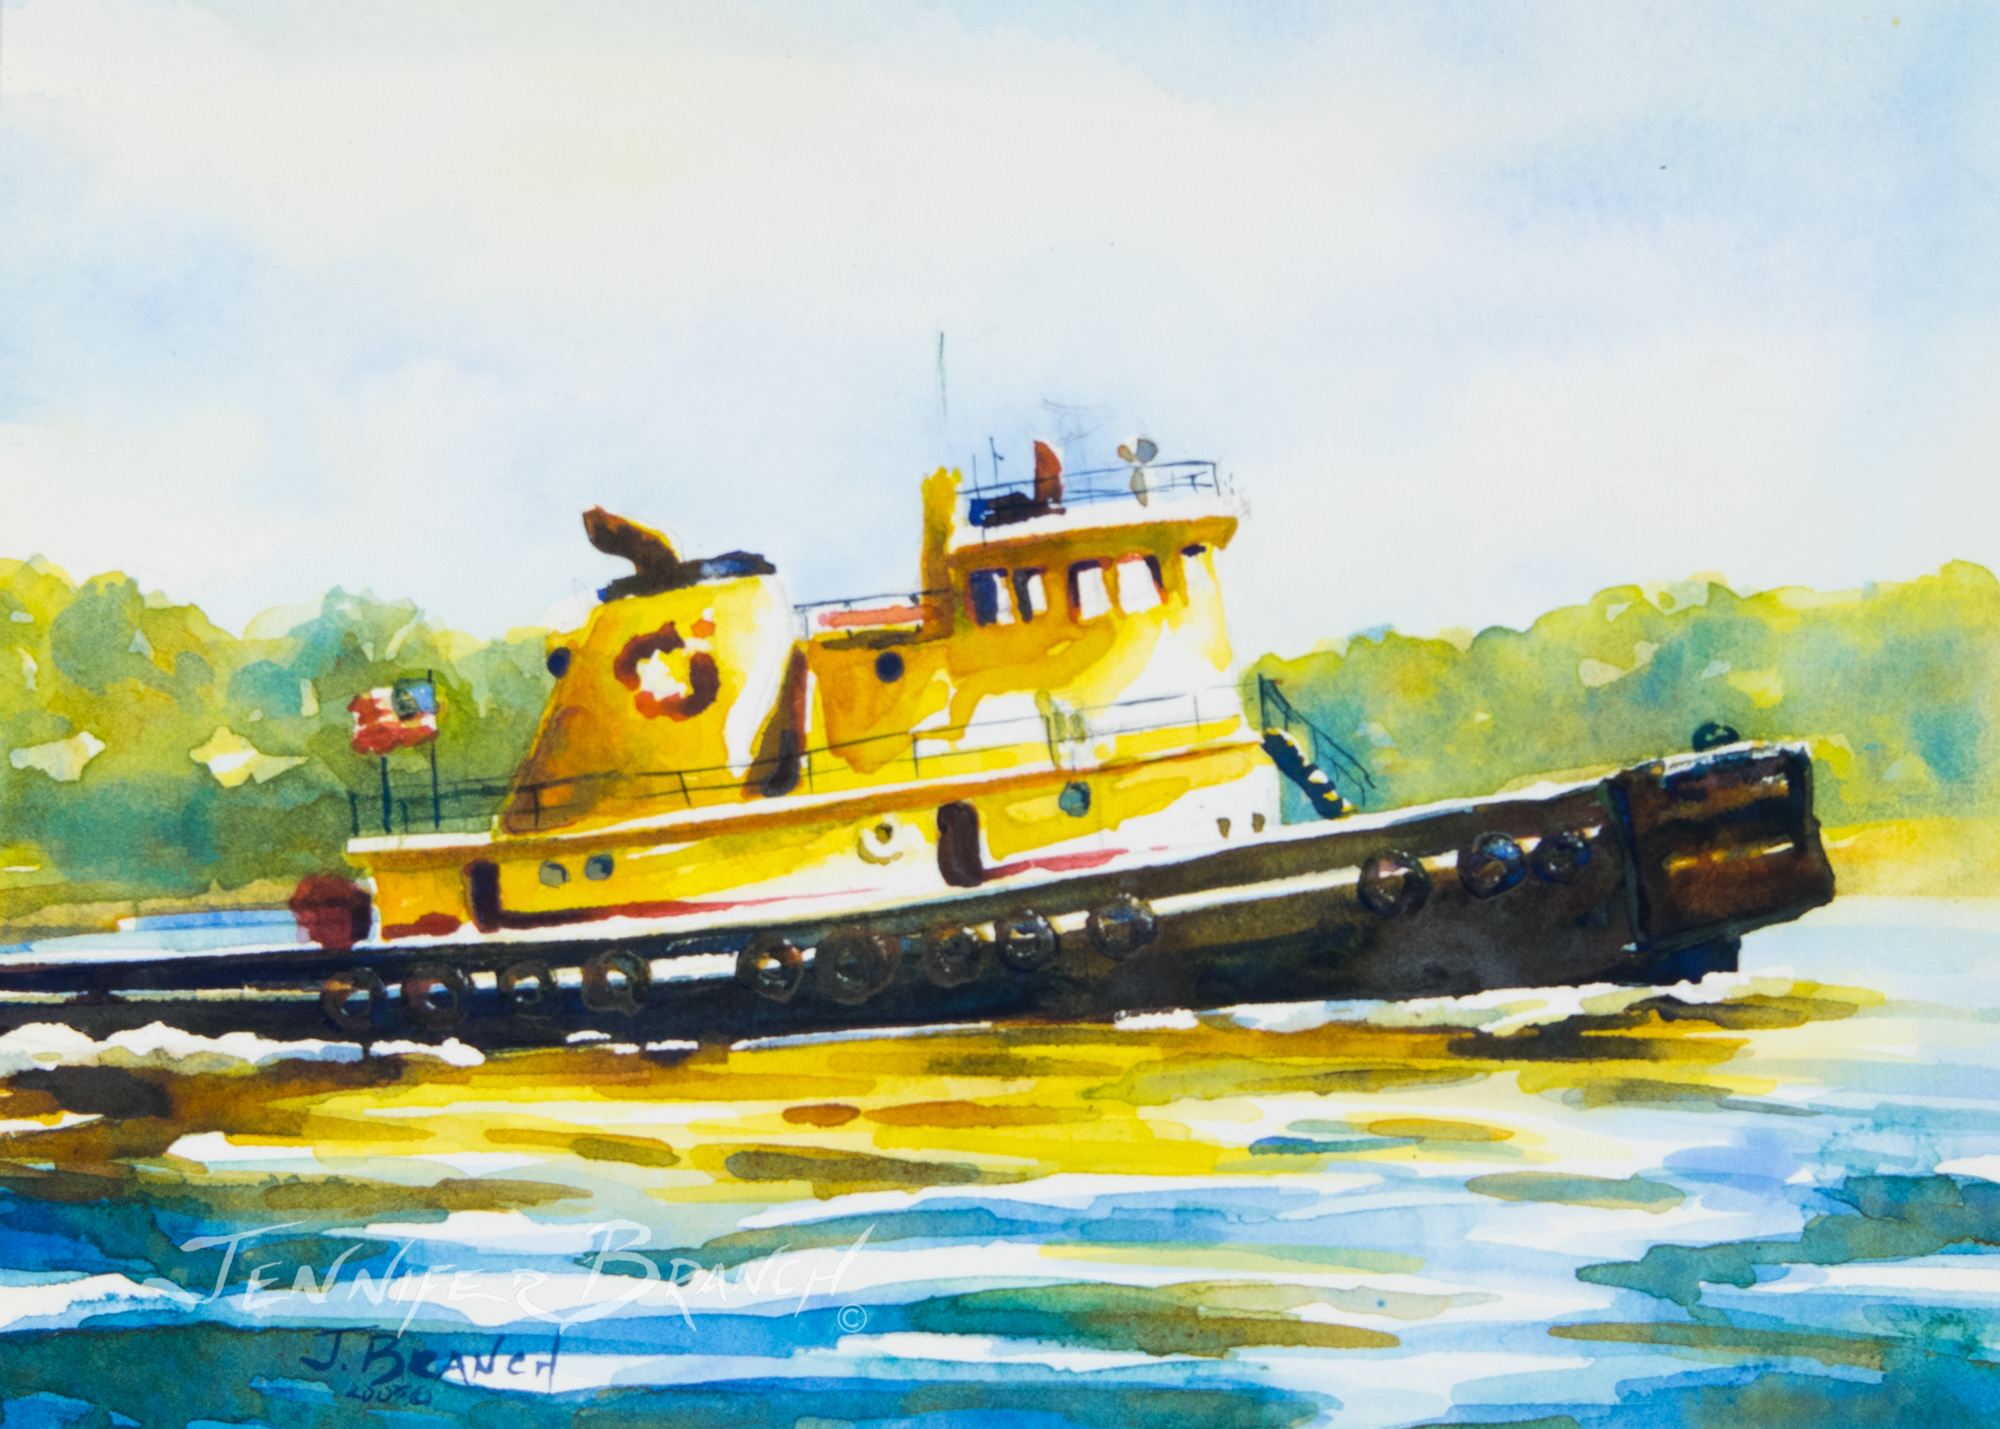 tugboat watercolor painting by Jennifer Branch.